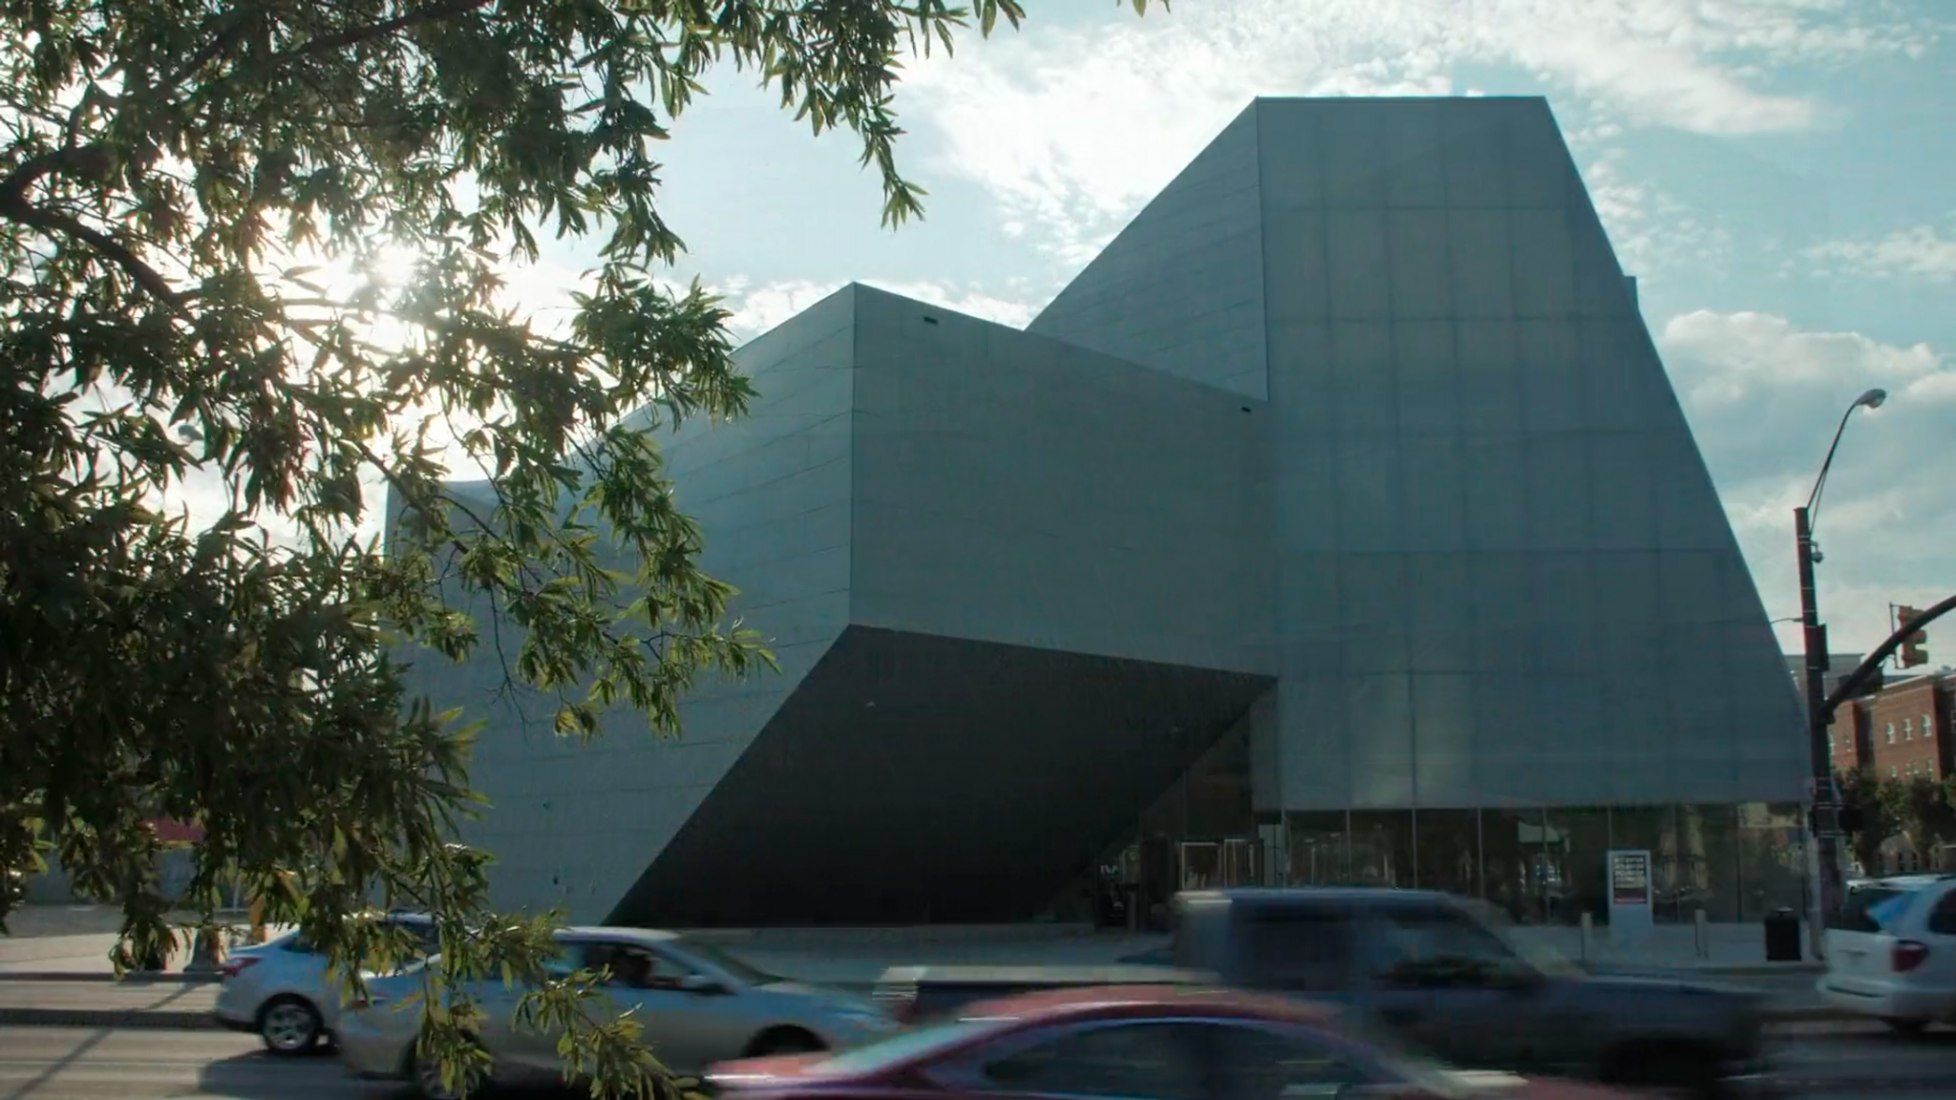 [NEW VIDEO] The Institute for Contemporary Art by Steven Holl ...